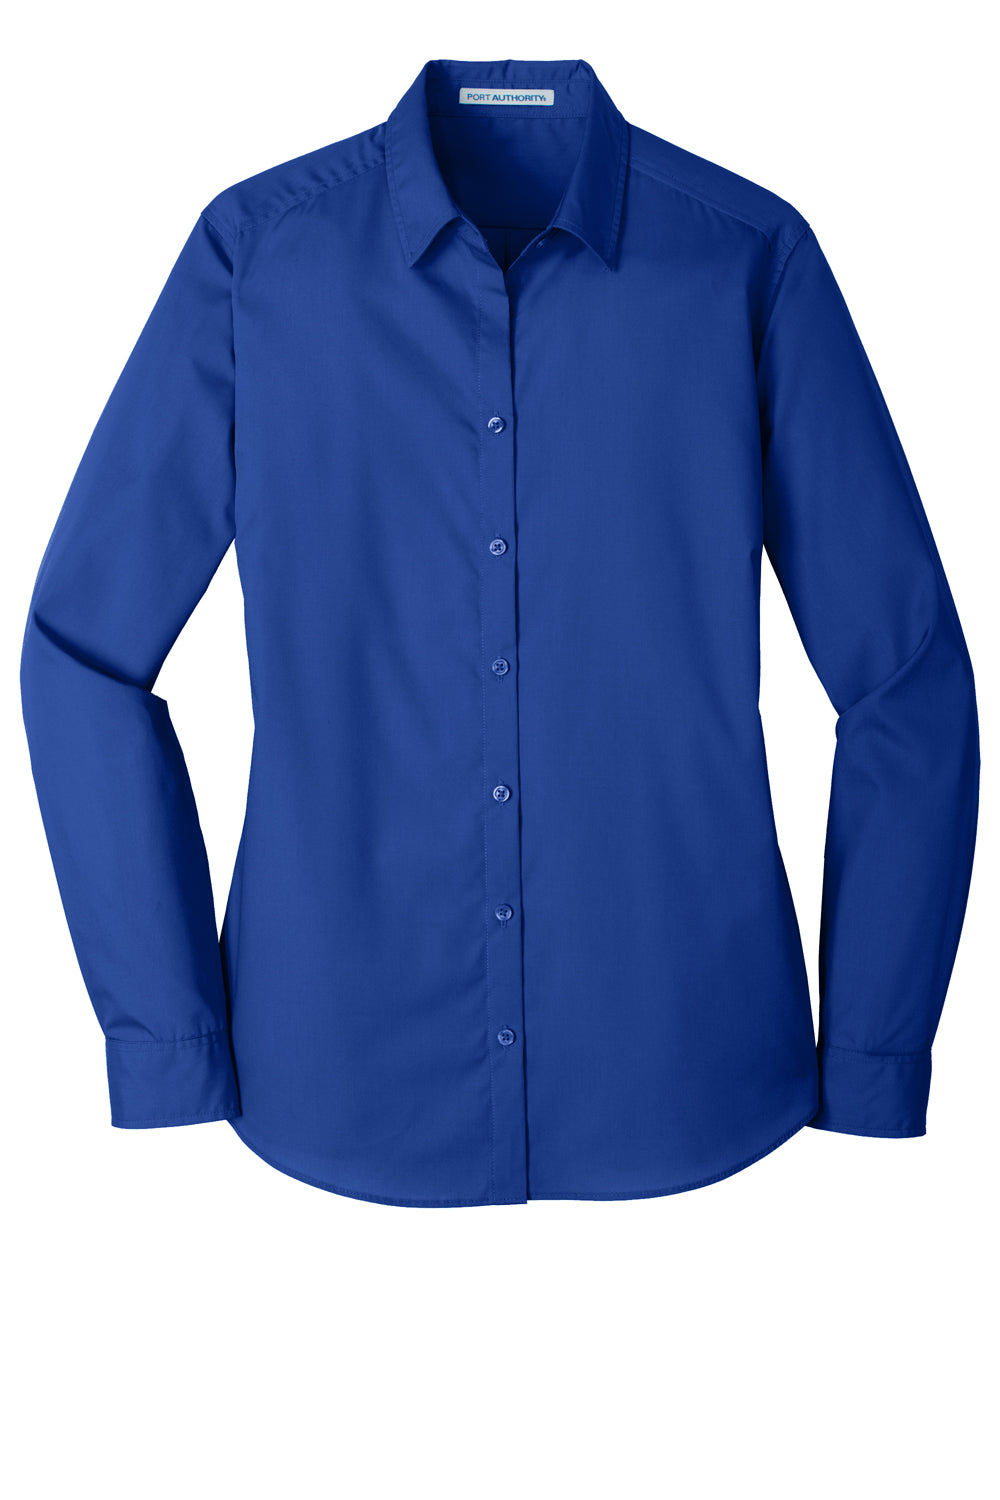 Port Authority LW100 Womens Carefree Stain Resistant Long Sleeve Button Down Shirt True Royal Blue Flat Front